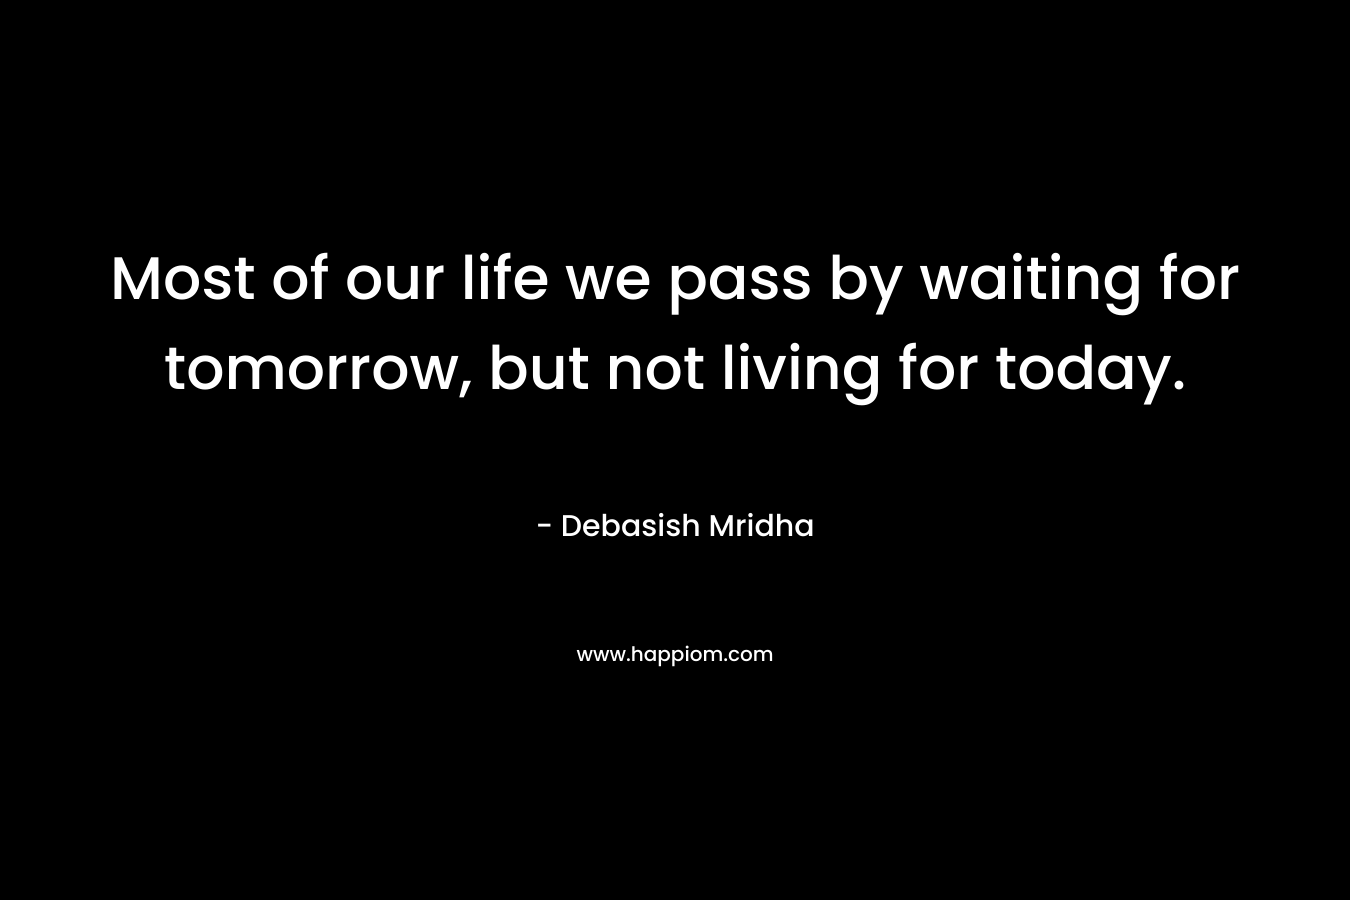 Most of our life we pass by waiting for tomorrow, but not living for today.